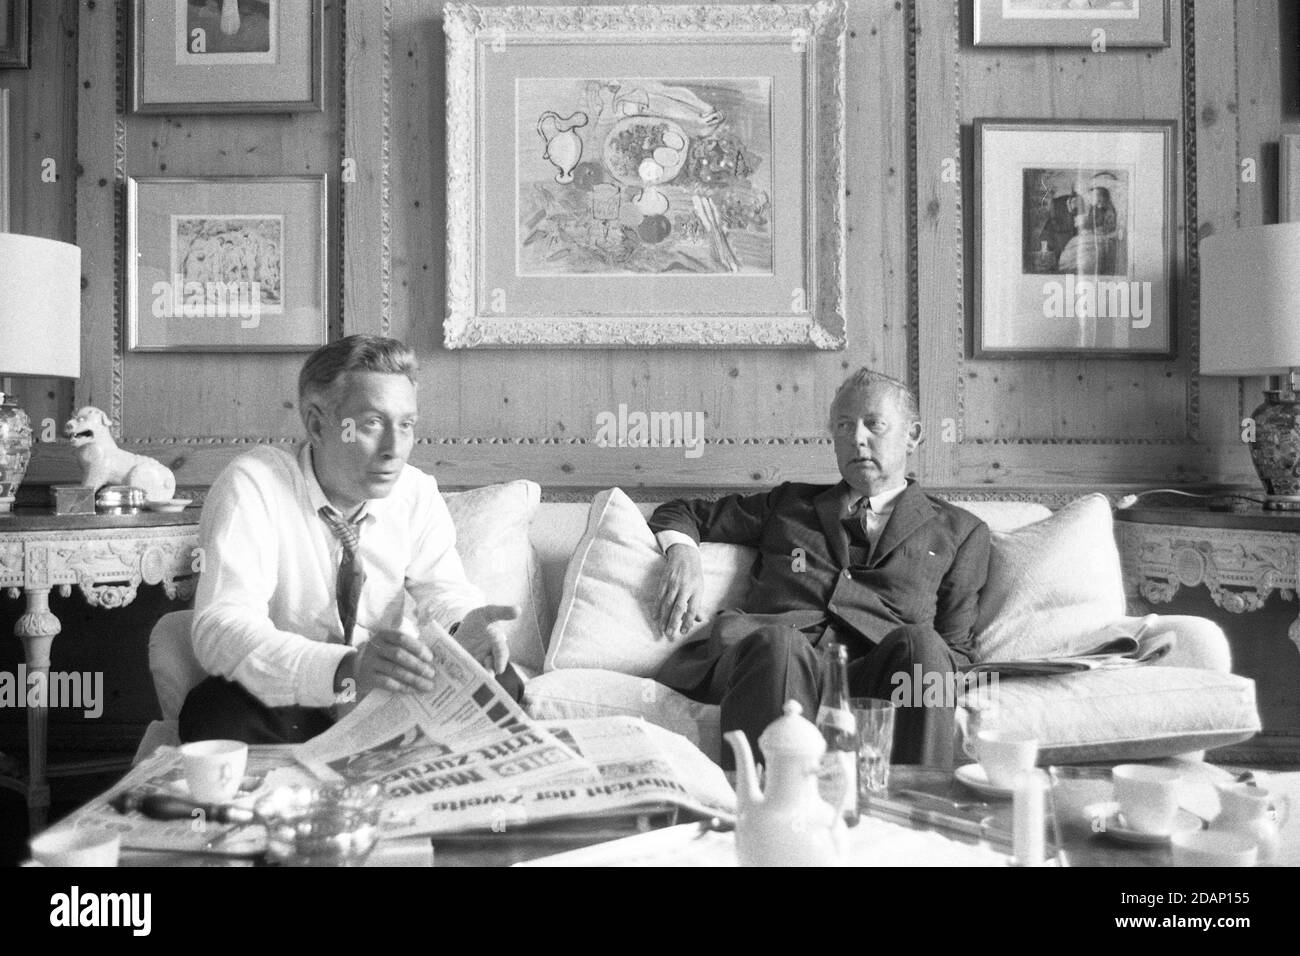 Hamburg, Deutschland. 14th Nov, 2020. Former 'Bild' editor-in-chief Guenter PRINZ died at the age of 91. Archive photo: Axel Caesar SPRINGER, CvÉ¬sssar, Germany, newspaper publisher, here in conversation with Guenther PRINZ, GvÉ¬ºnther, editor-in-chief of Bild-Zeitung, both sitting on a sofa, b/w recording, 03.06.1971.vÇ¬ | usage worldwide Credit: dpa/Alamy Live News Stock Photo